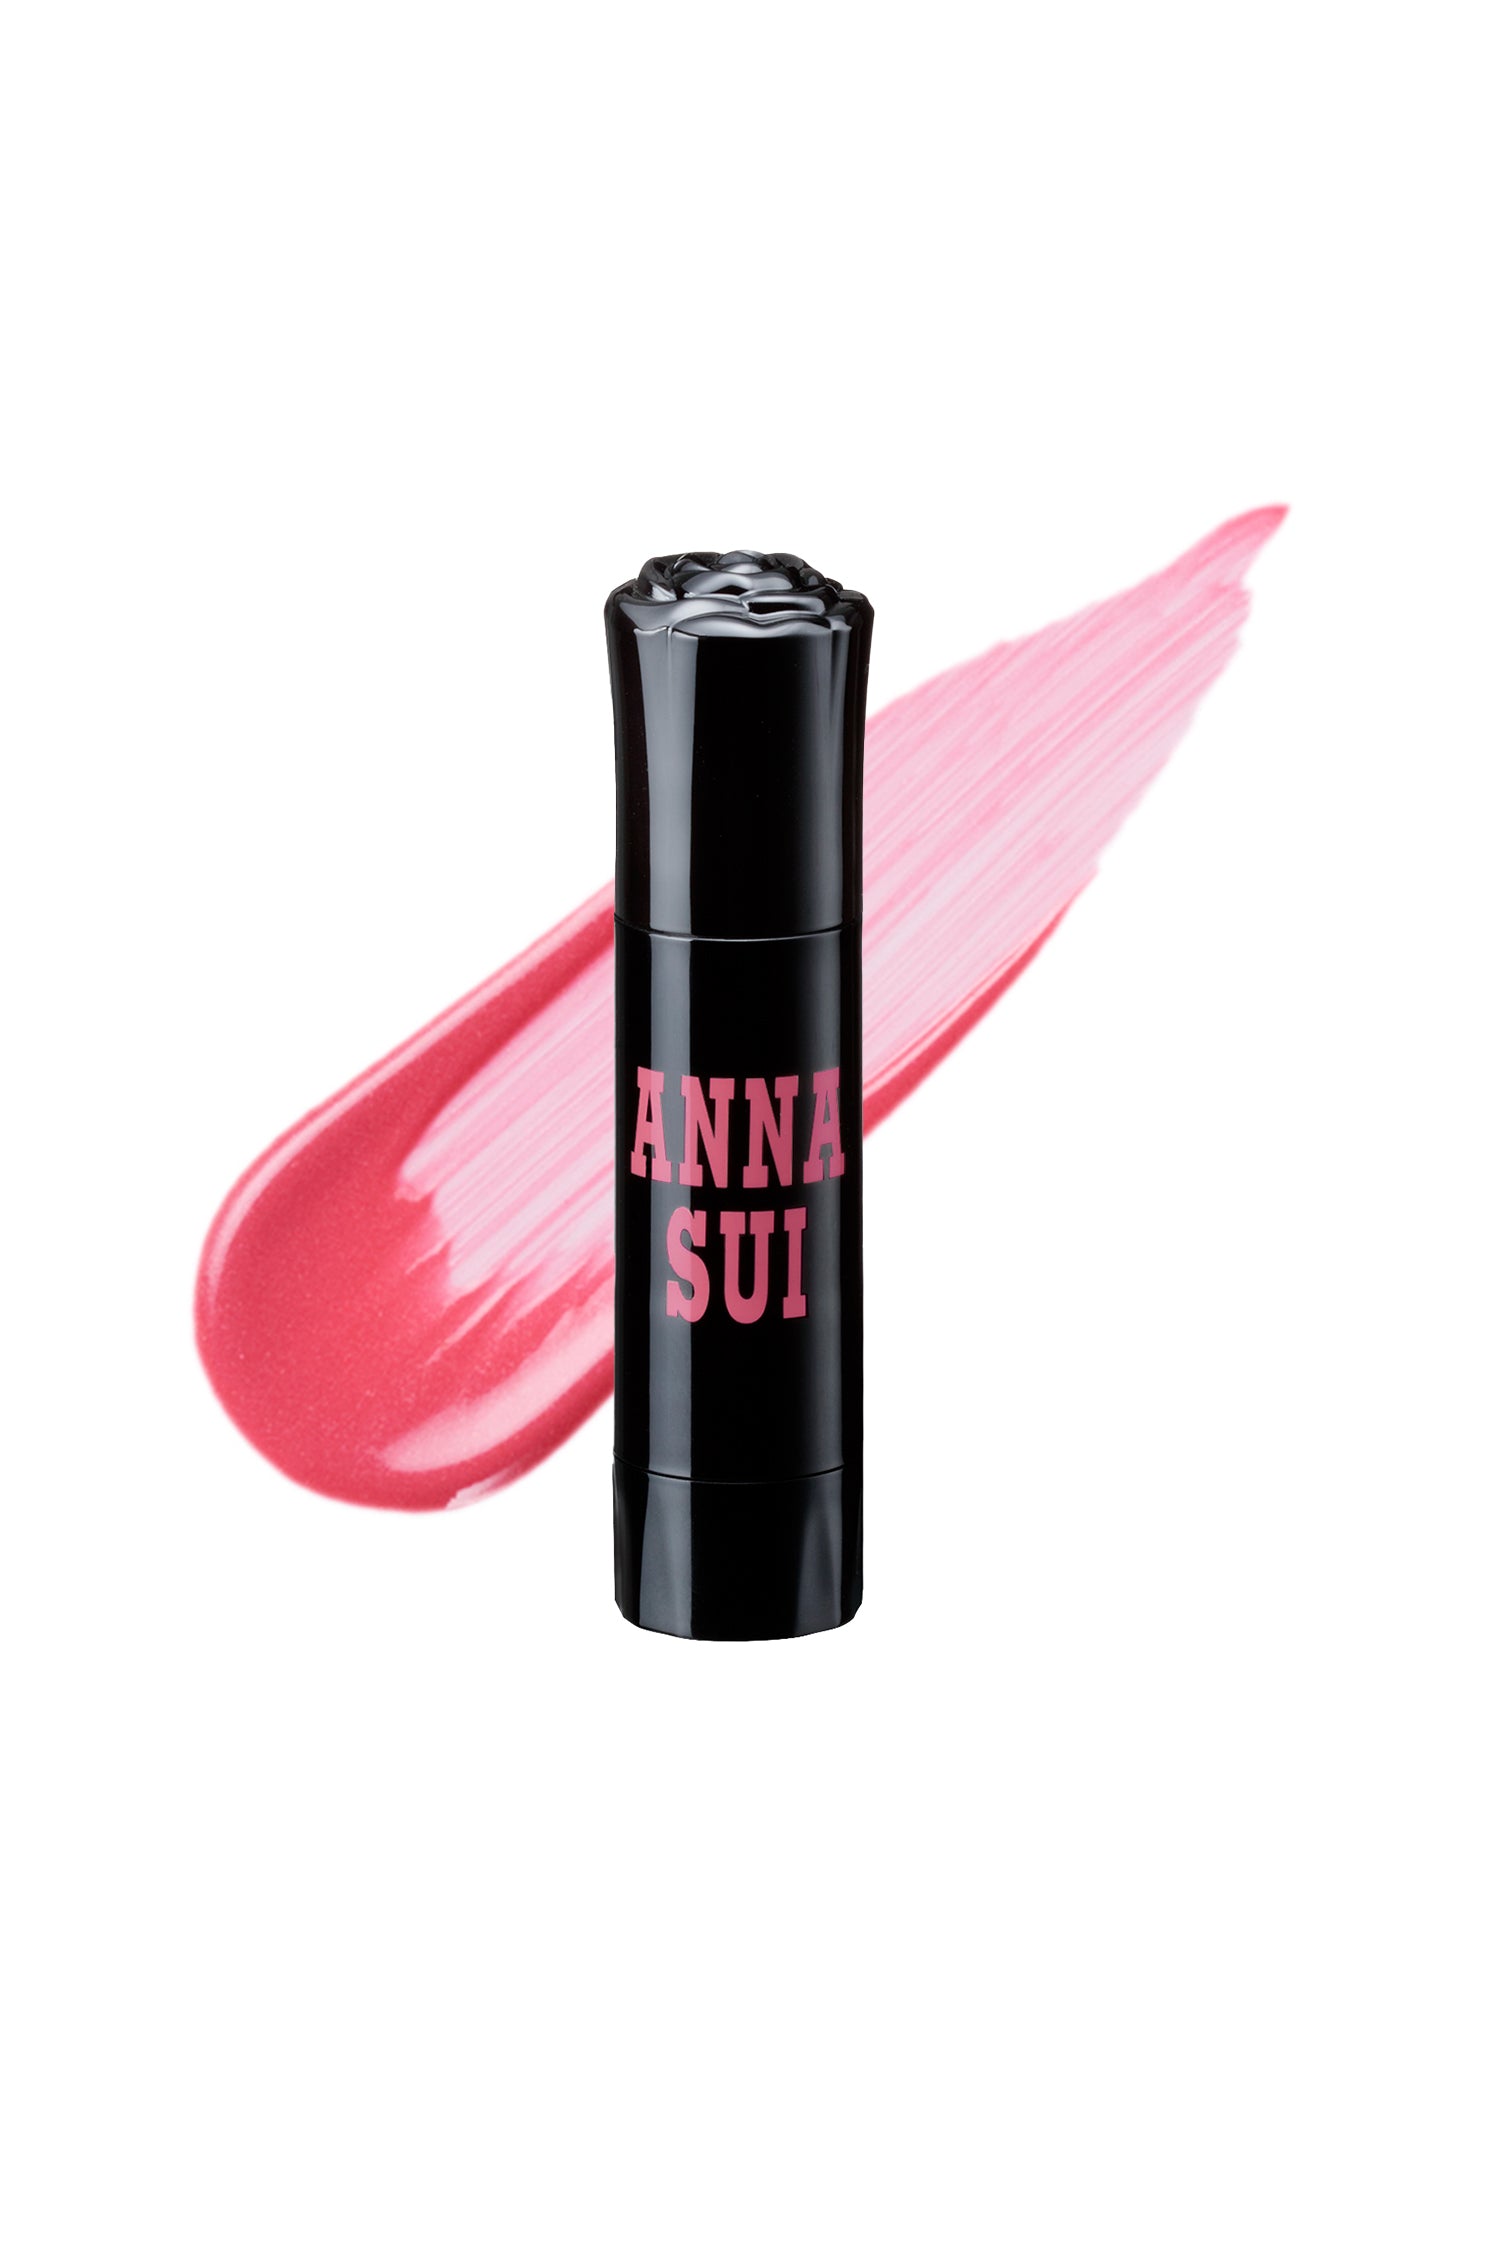 ROSE - Anna Sui color match the product on cylinder case with a rose on top the 